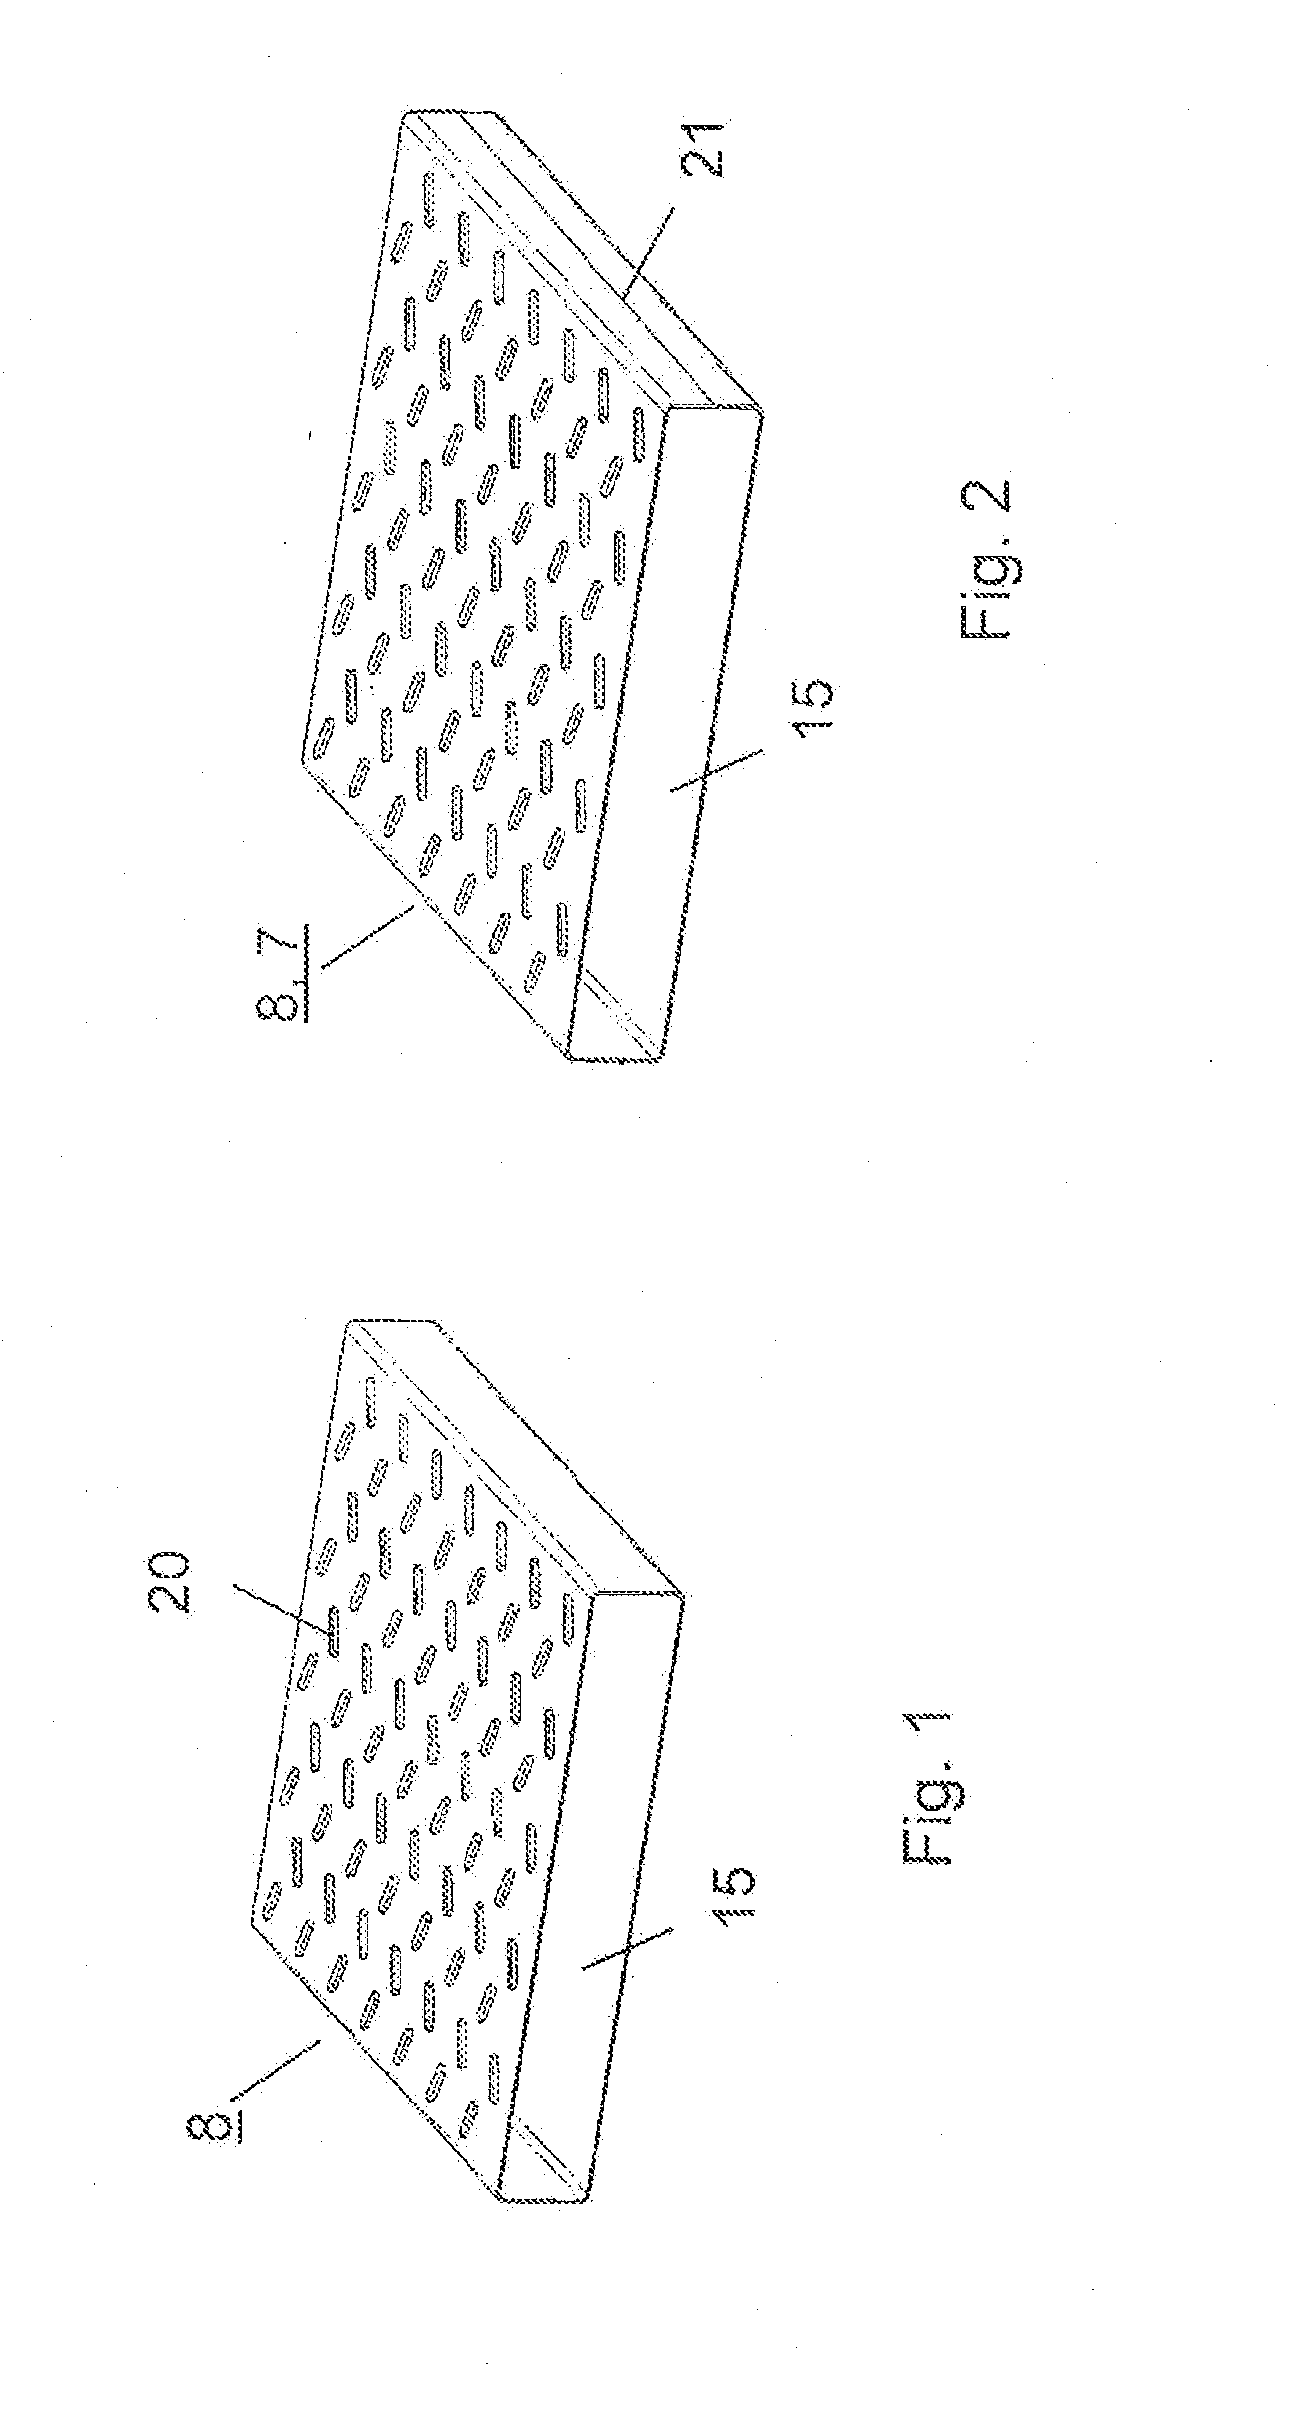 Thermoelectric unit